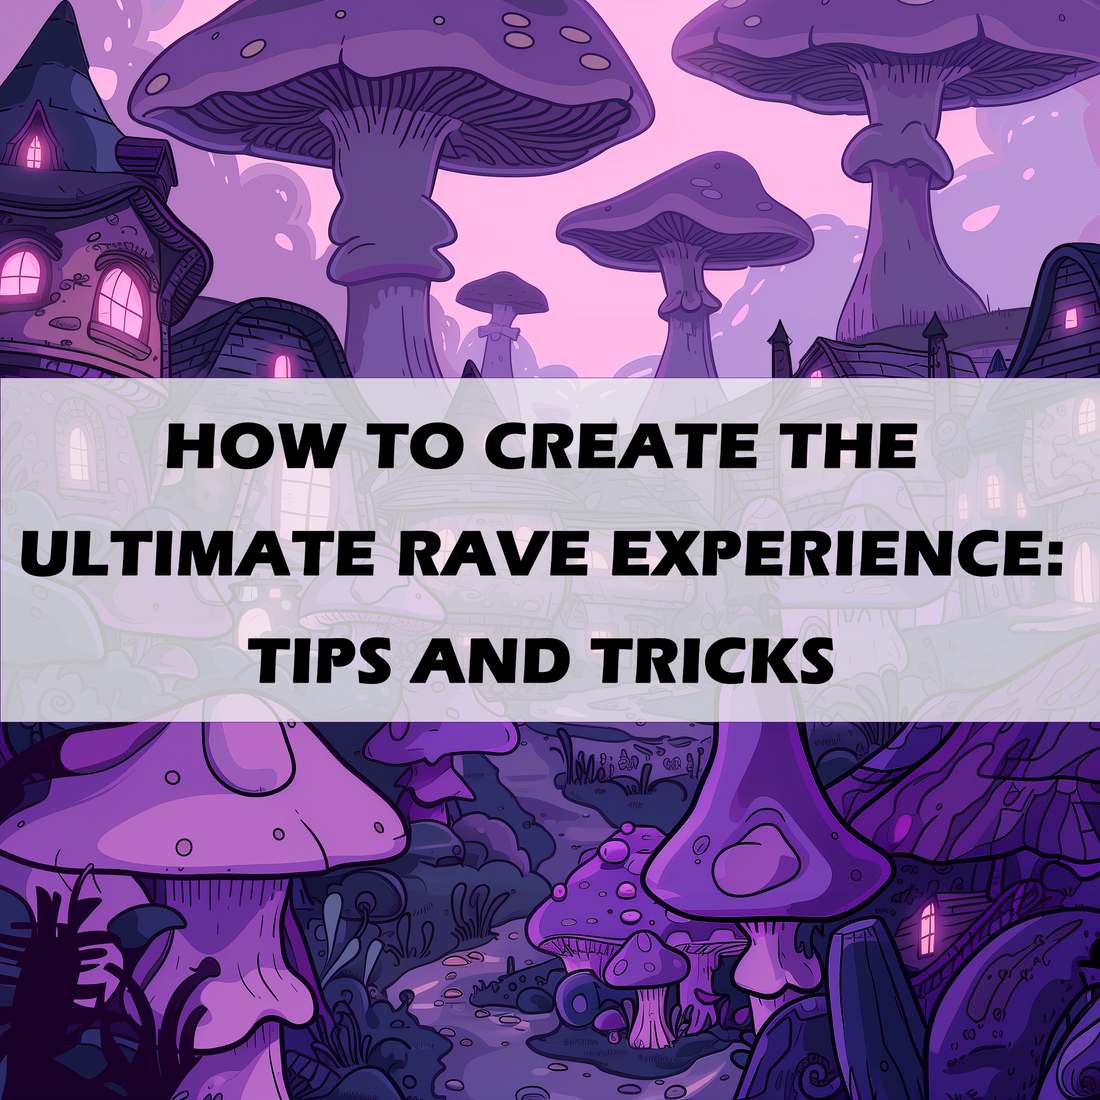 How to Create the Ultimate Rave Experience: Tips and Tricks